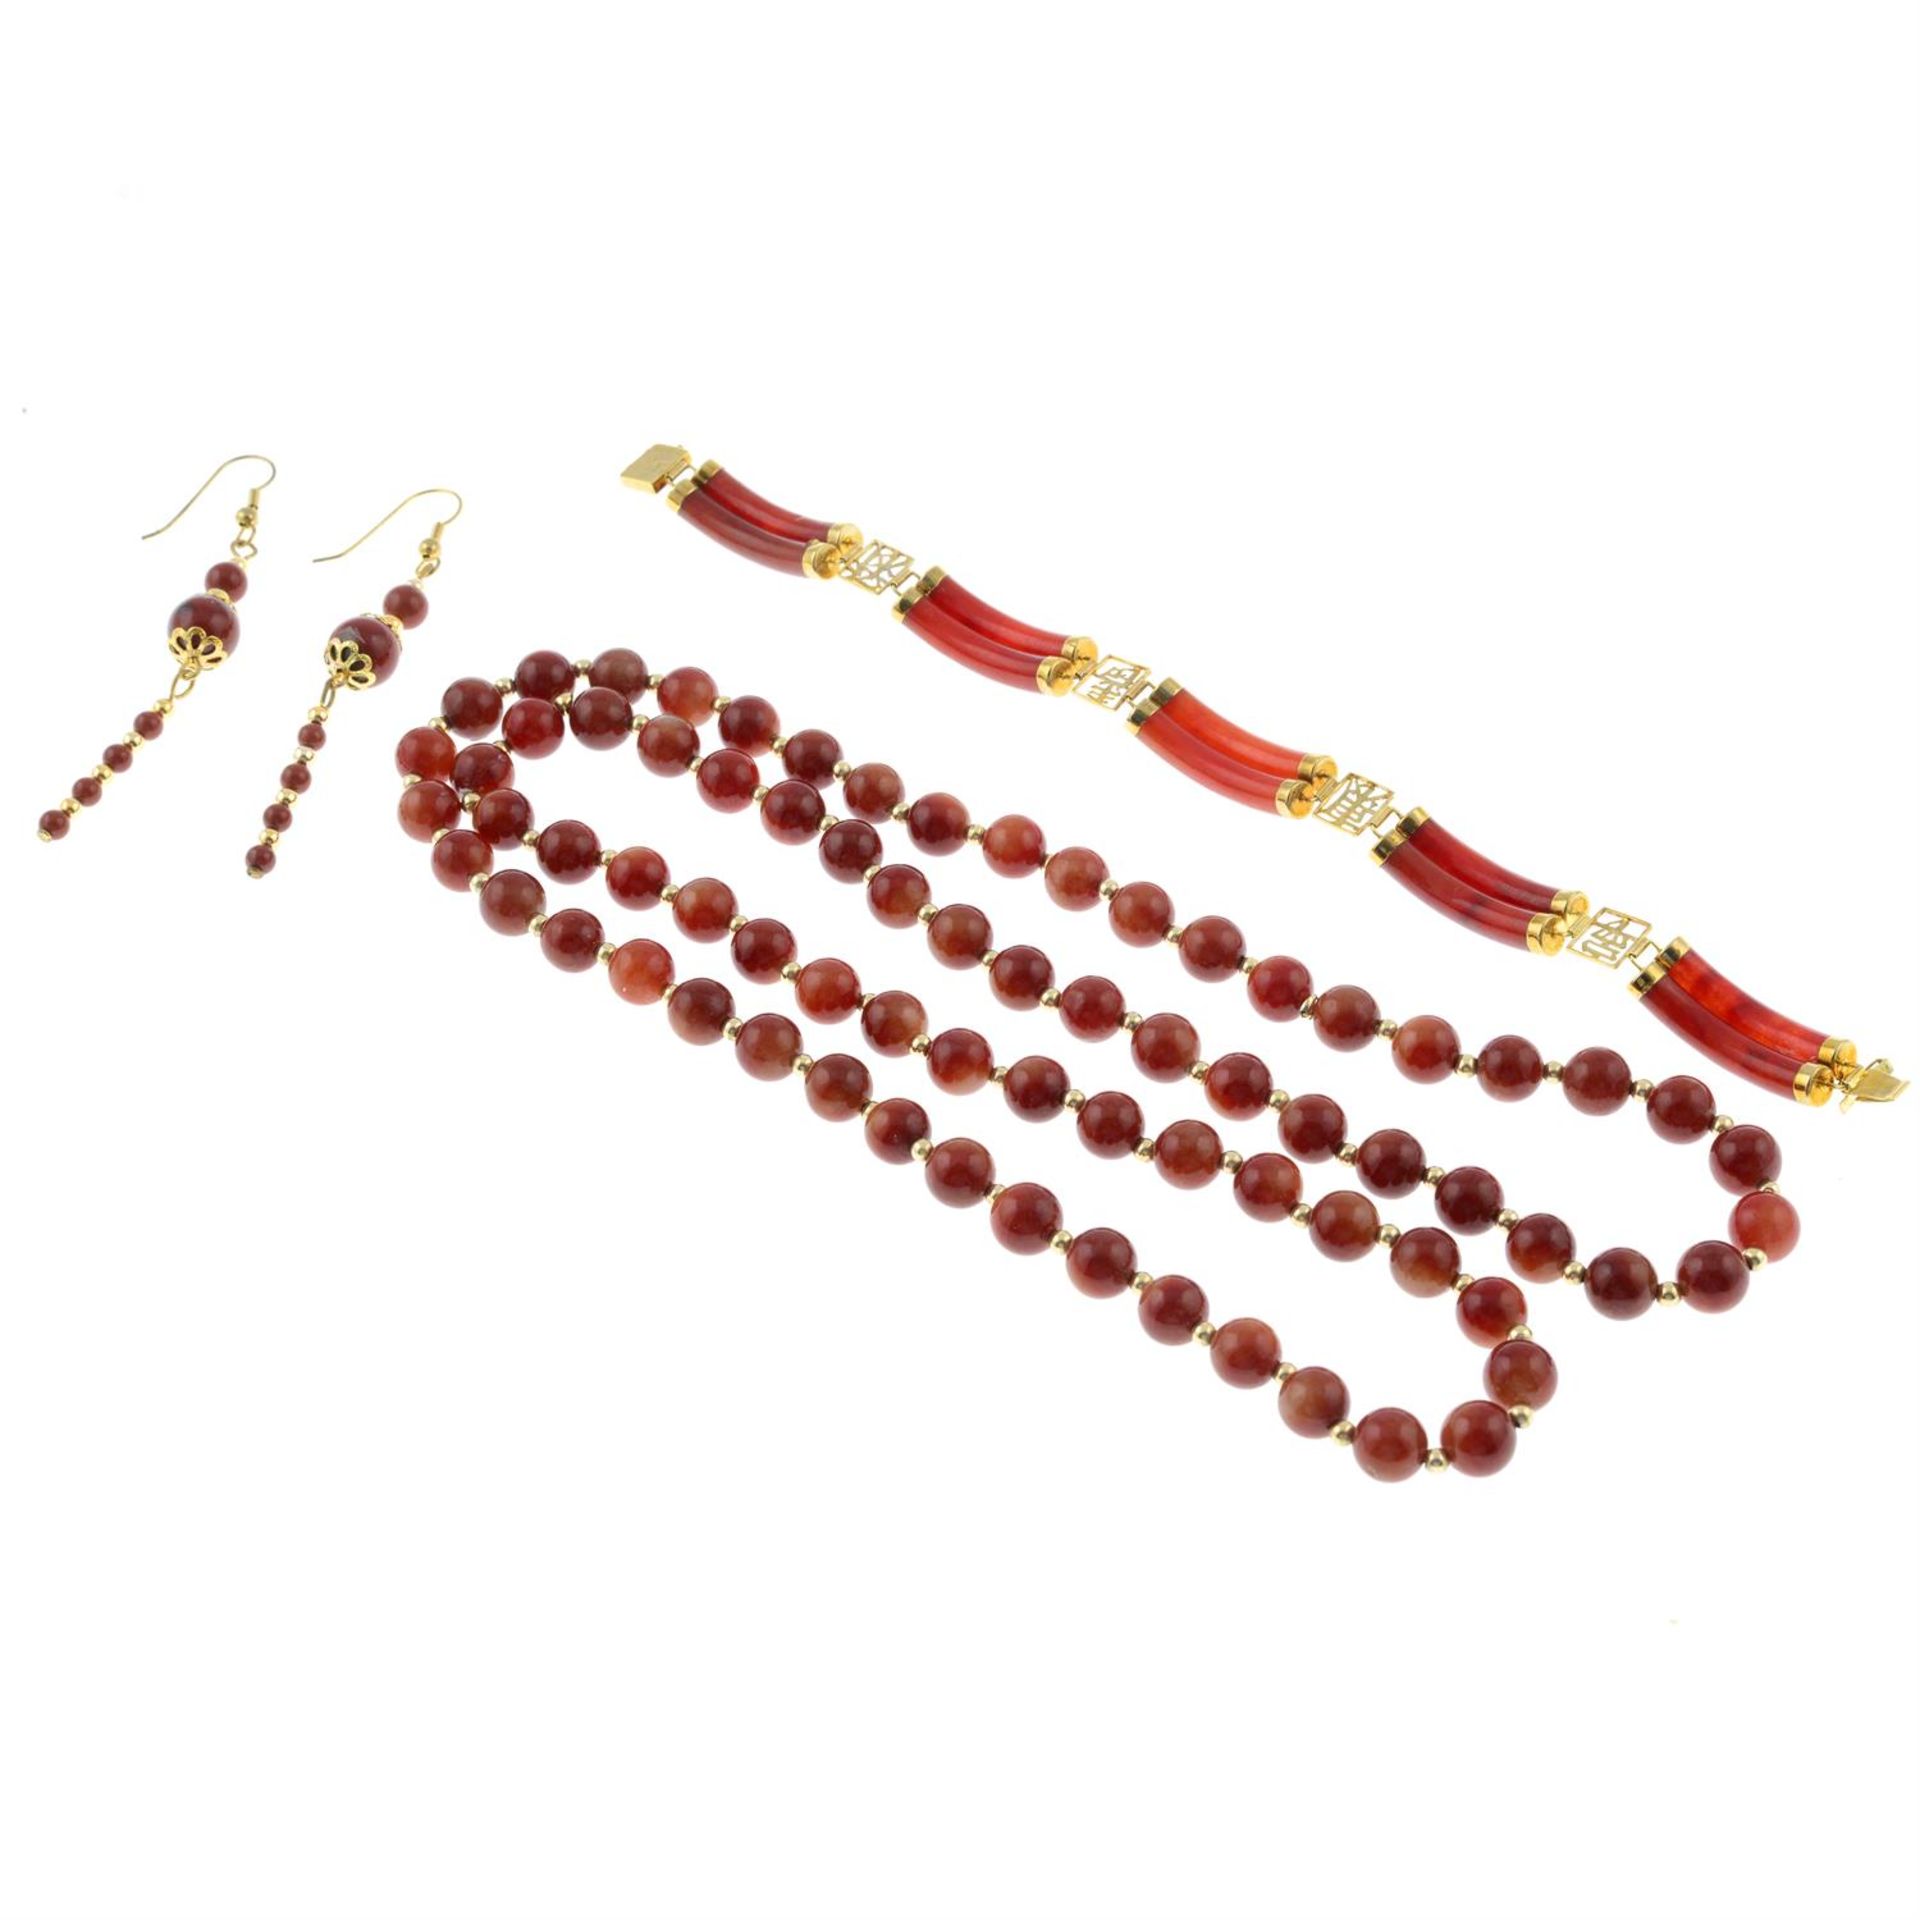 A jasper necklace, with earrings, together with a carnelian panel bracelet. - Image 2 of 2